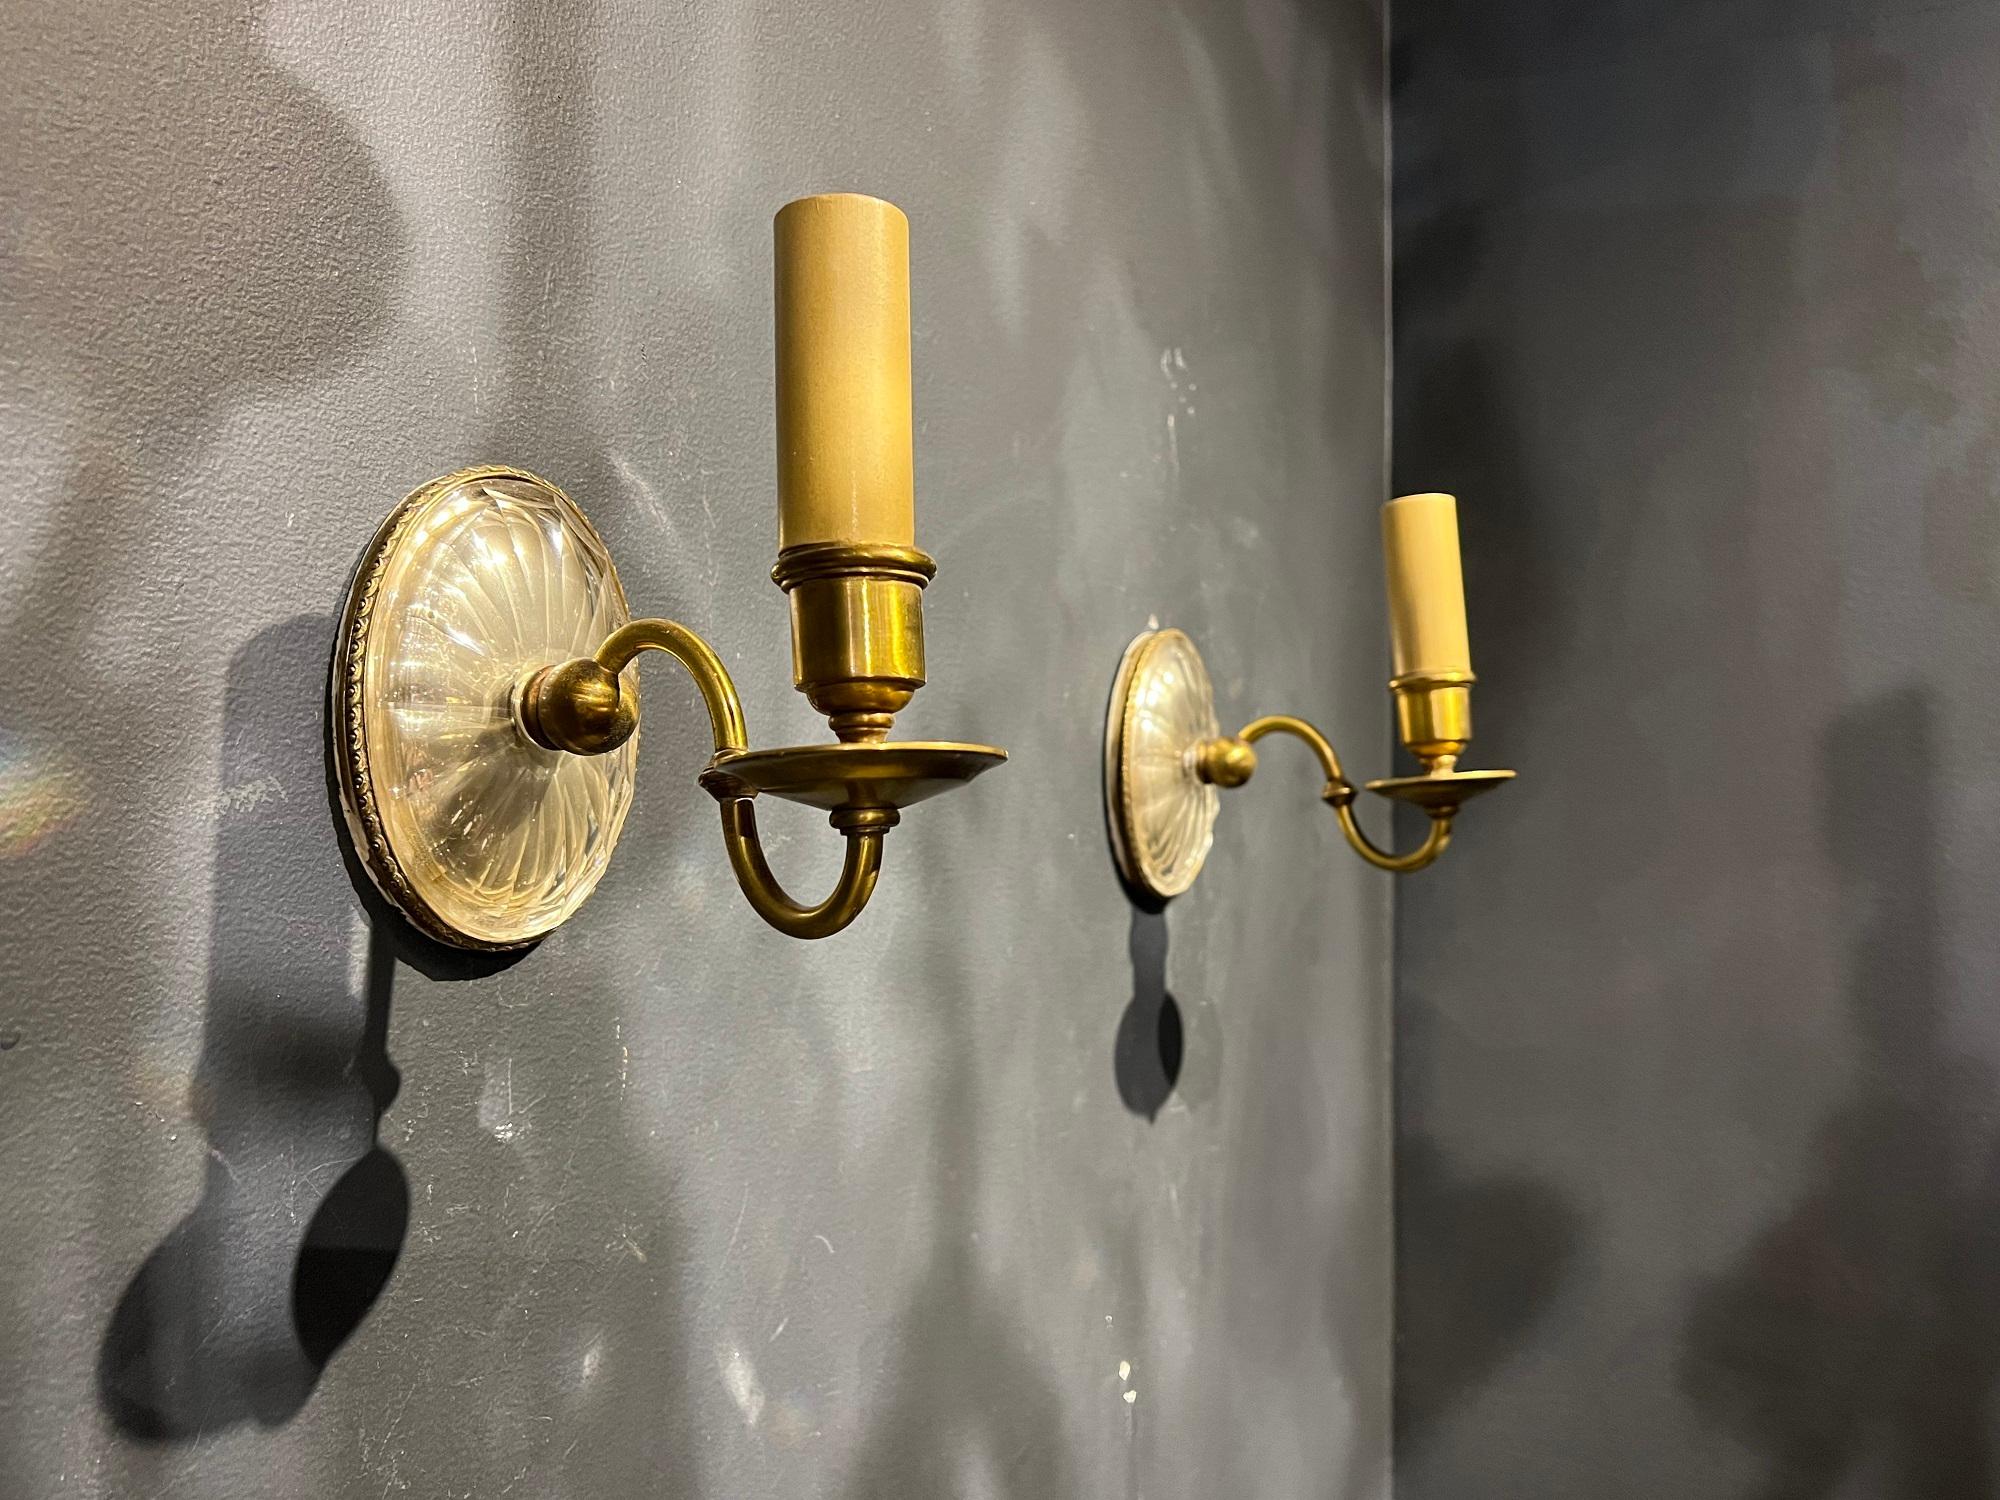 American Classical 1920s Caldwell Bronze and Glass Sconces with one light